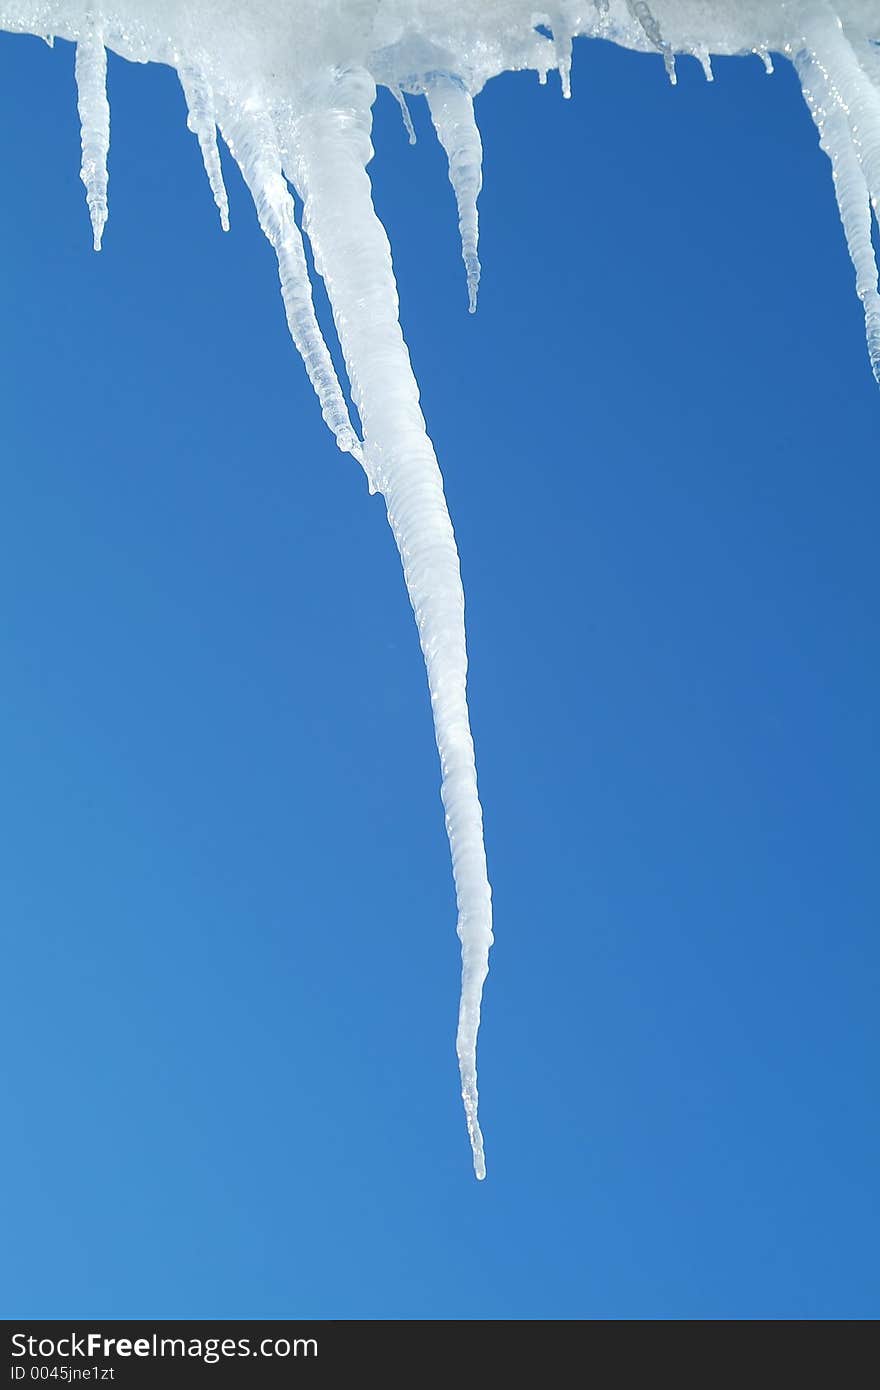 Icicles on sky close-up